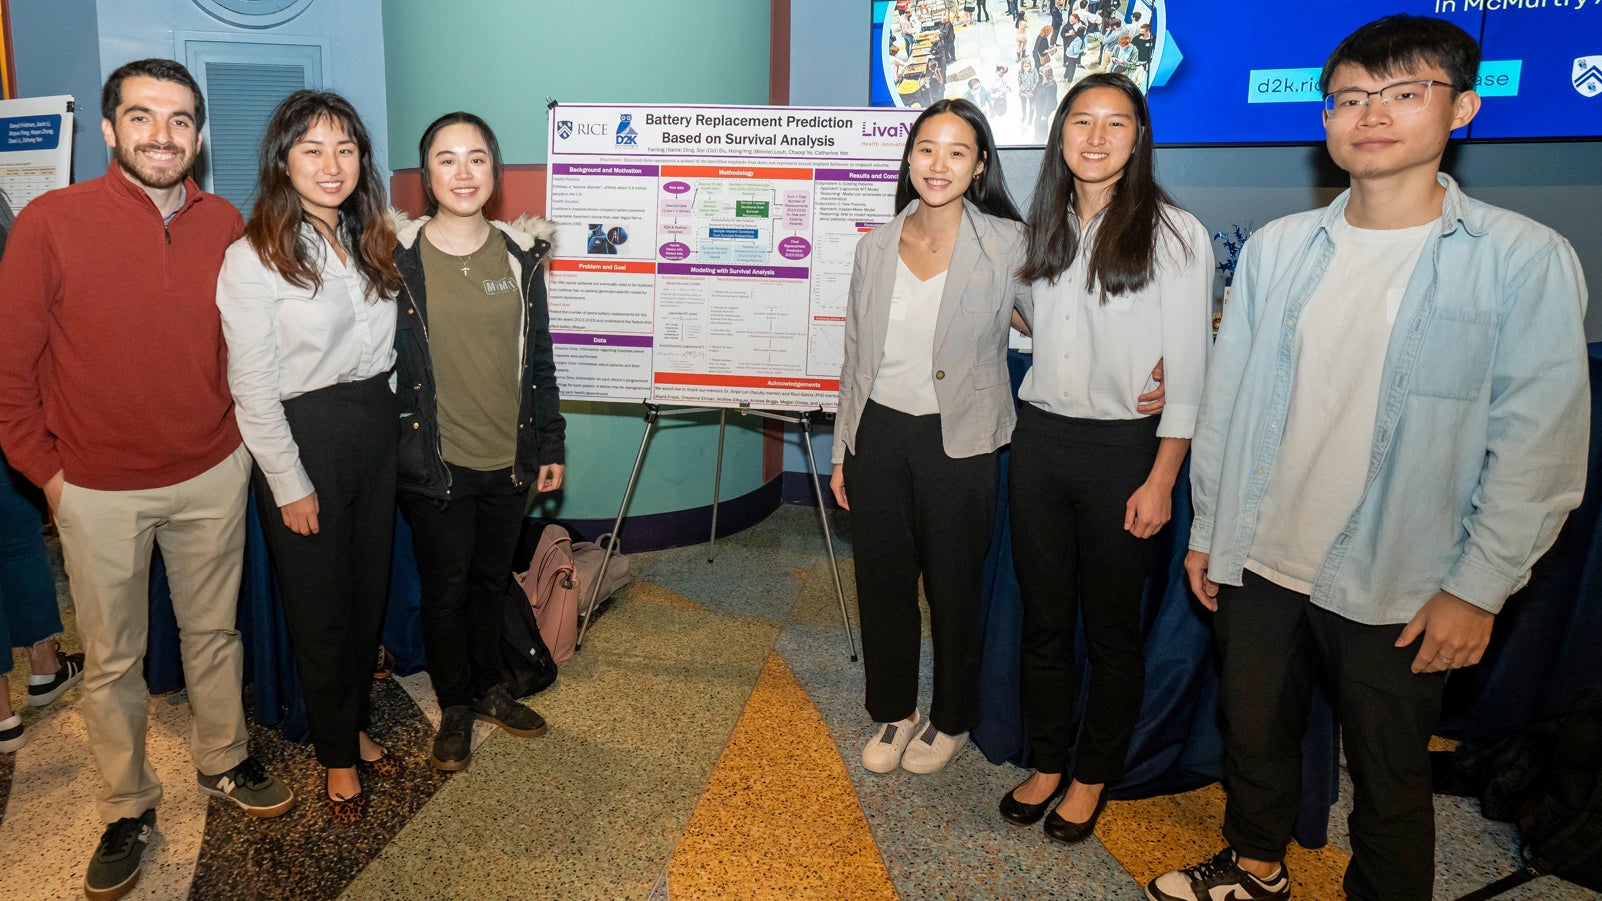  Photo caption: Focusing on optimal battery replacement for epilepsy treatment, Team LivaNova includes CMOR Ph.D. mentor Raul Garcia (far left) with Fanling "Vania" Ding, Siyi “Cici” Du, Catherine Yeh, Hsing-Yng “Winnie” Louh, and Chaoqi Ye. (Photo credits: Gustavo Raskosky) 